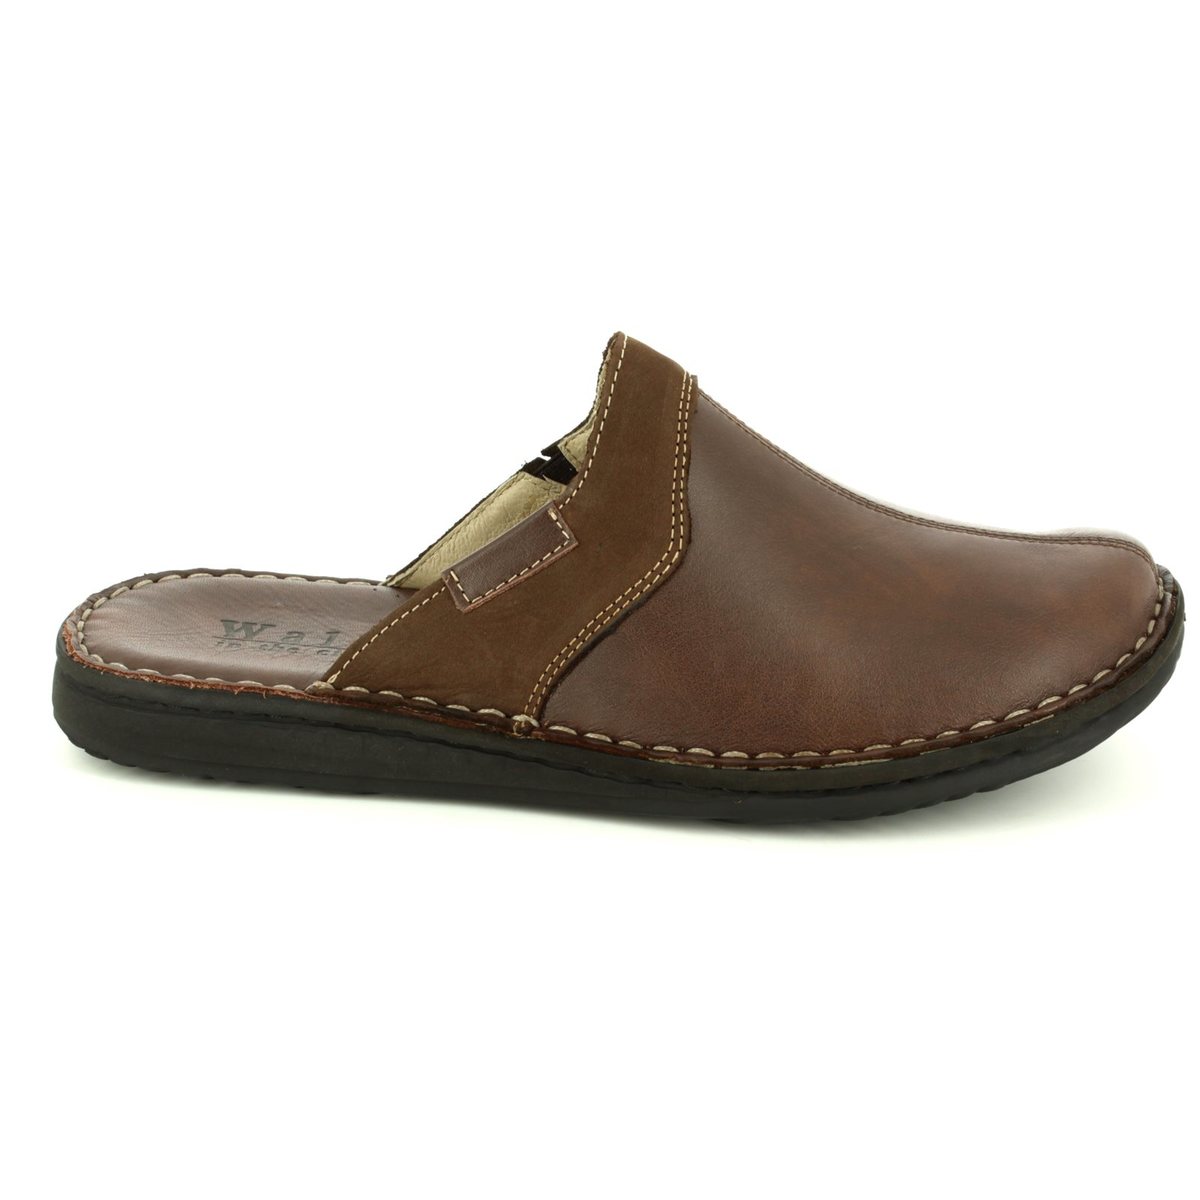 Walk in the City Leamu 230728800-22 Brown leather Mule Slippers